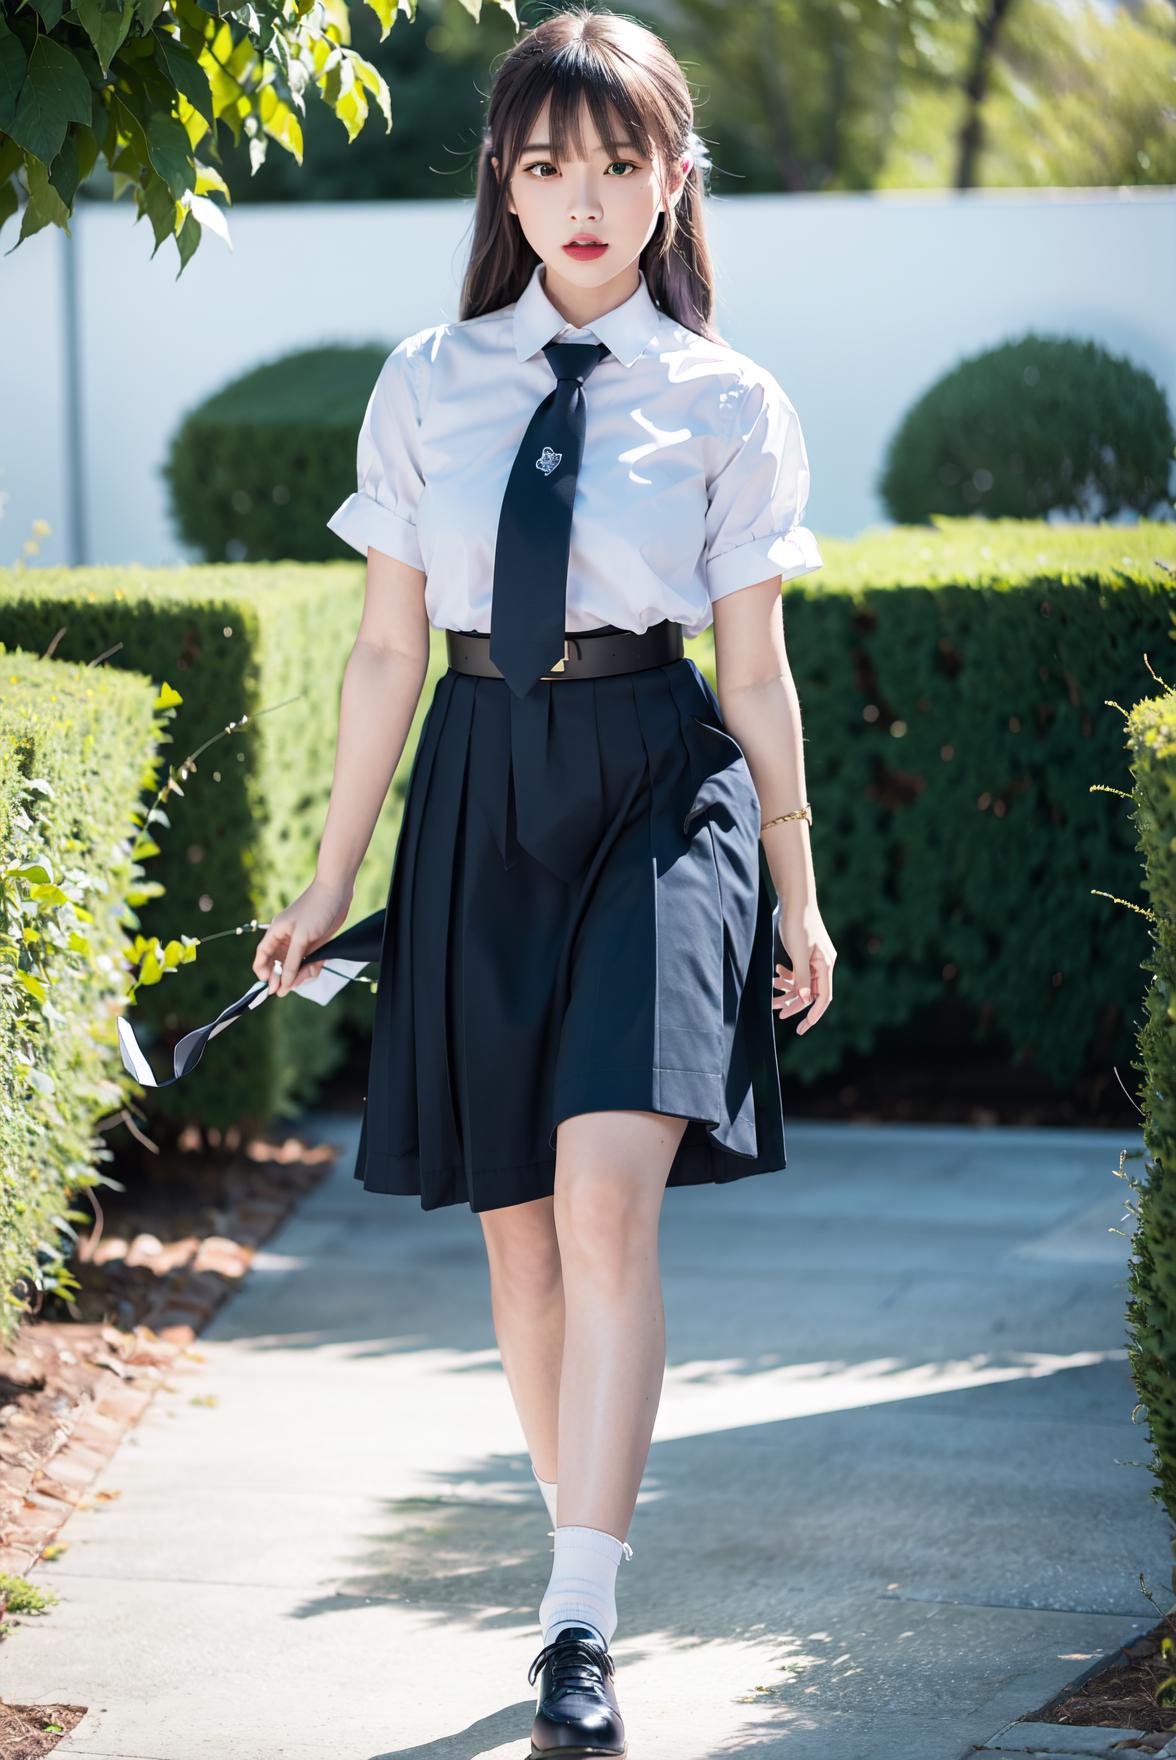 Thai High school uniform image by Prompt_Play